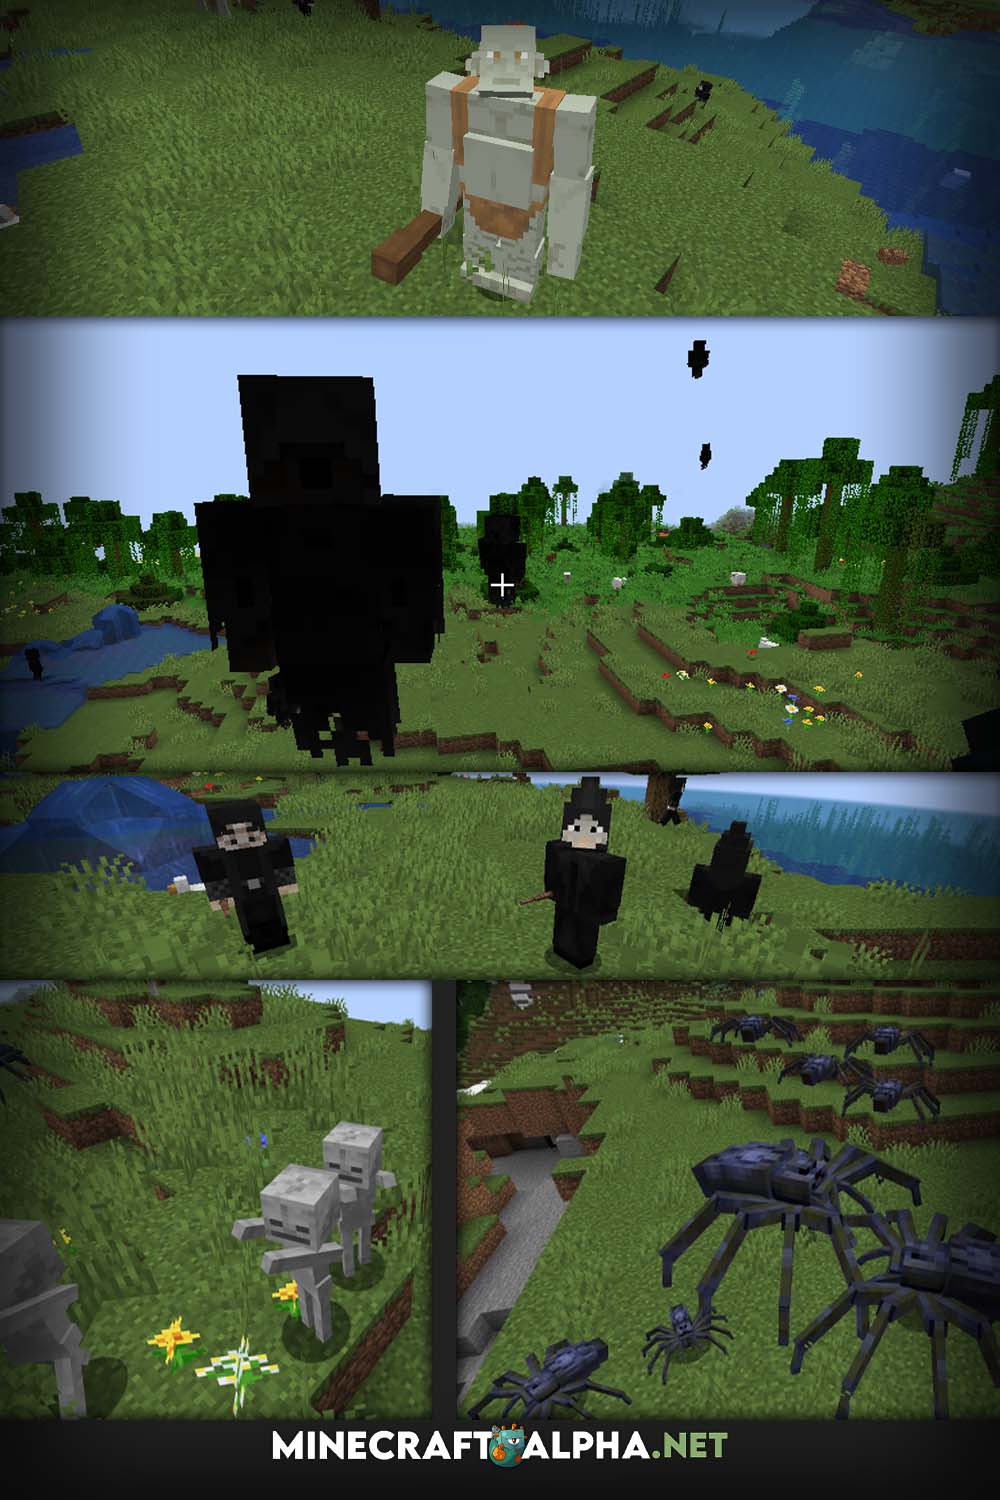 Wizarding World Of Harry Potter Mod [1.19.2, 1.18.2] (Add Harry Potter-style magic and perks to Minecraft)